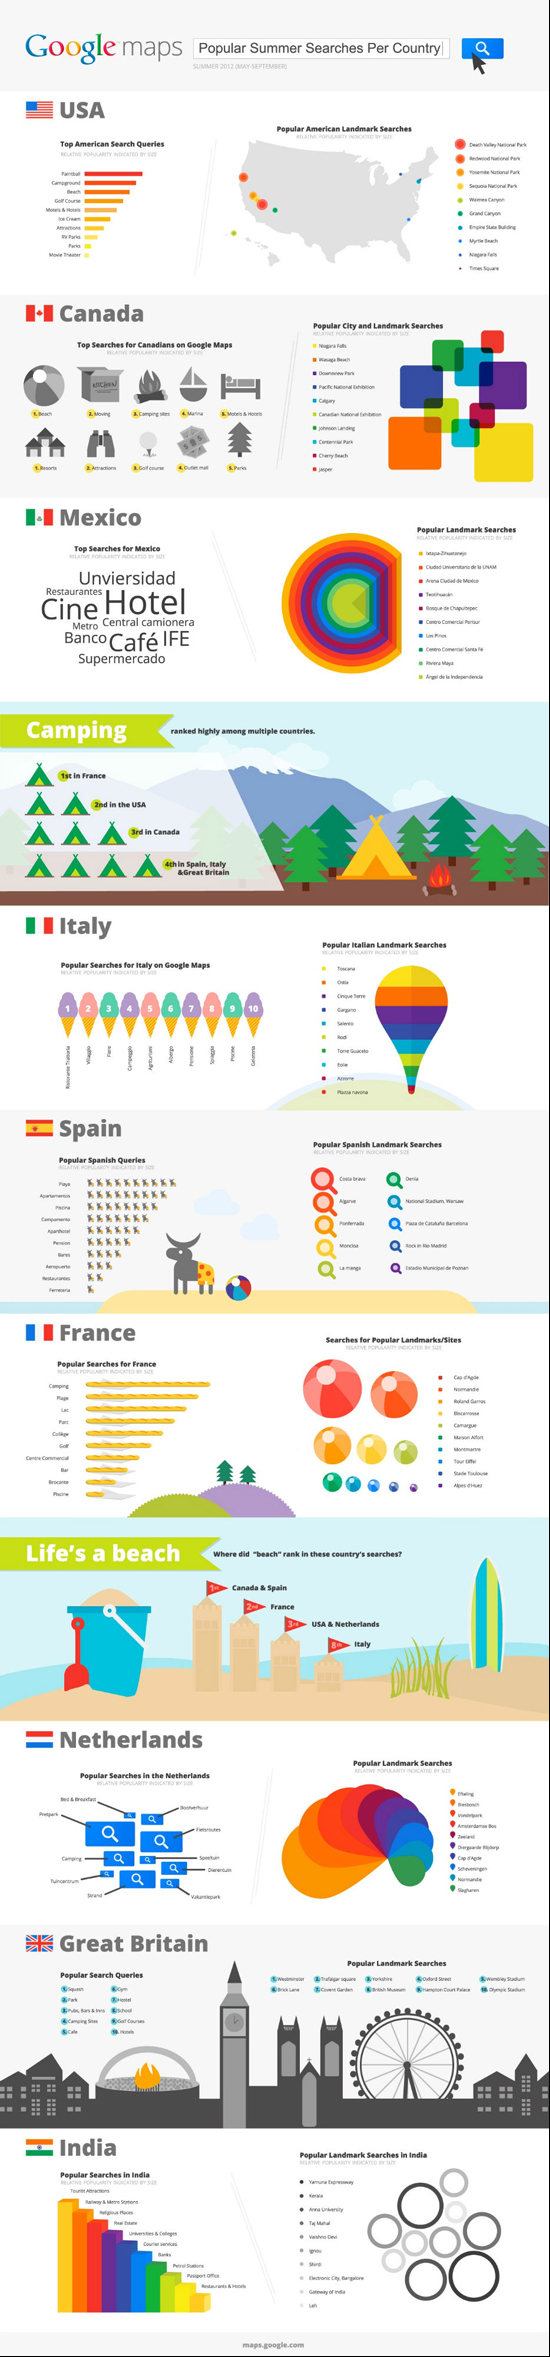 Summer 2012 Google Queries-Infographic